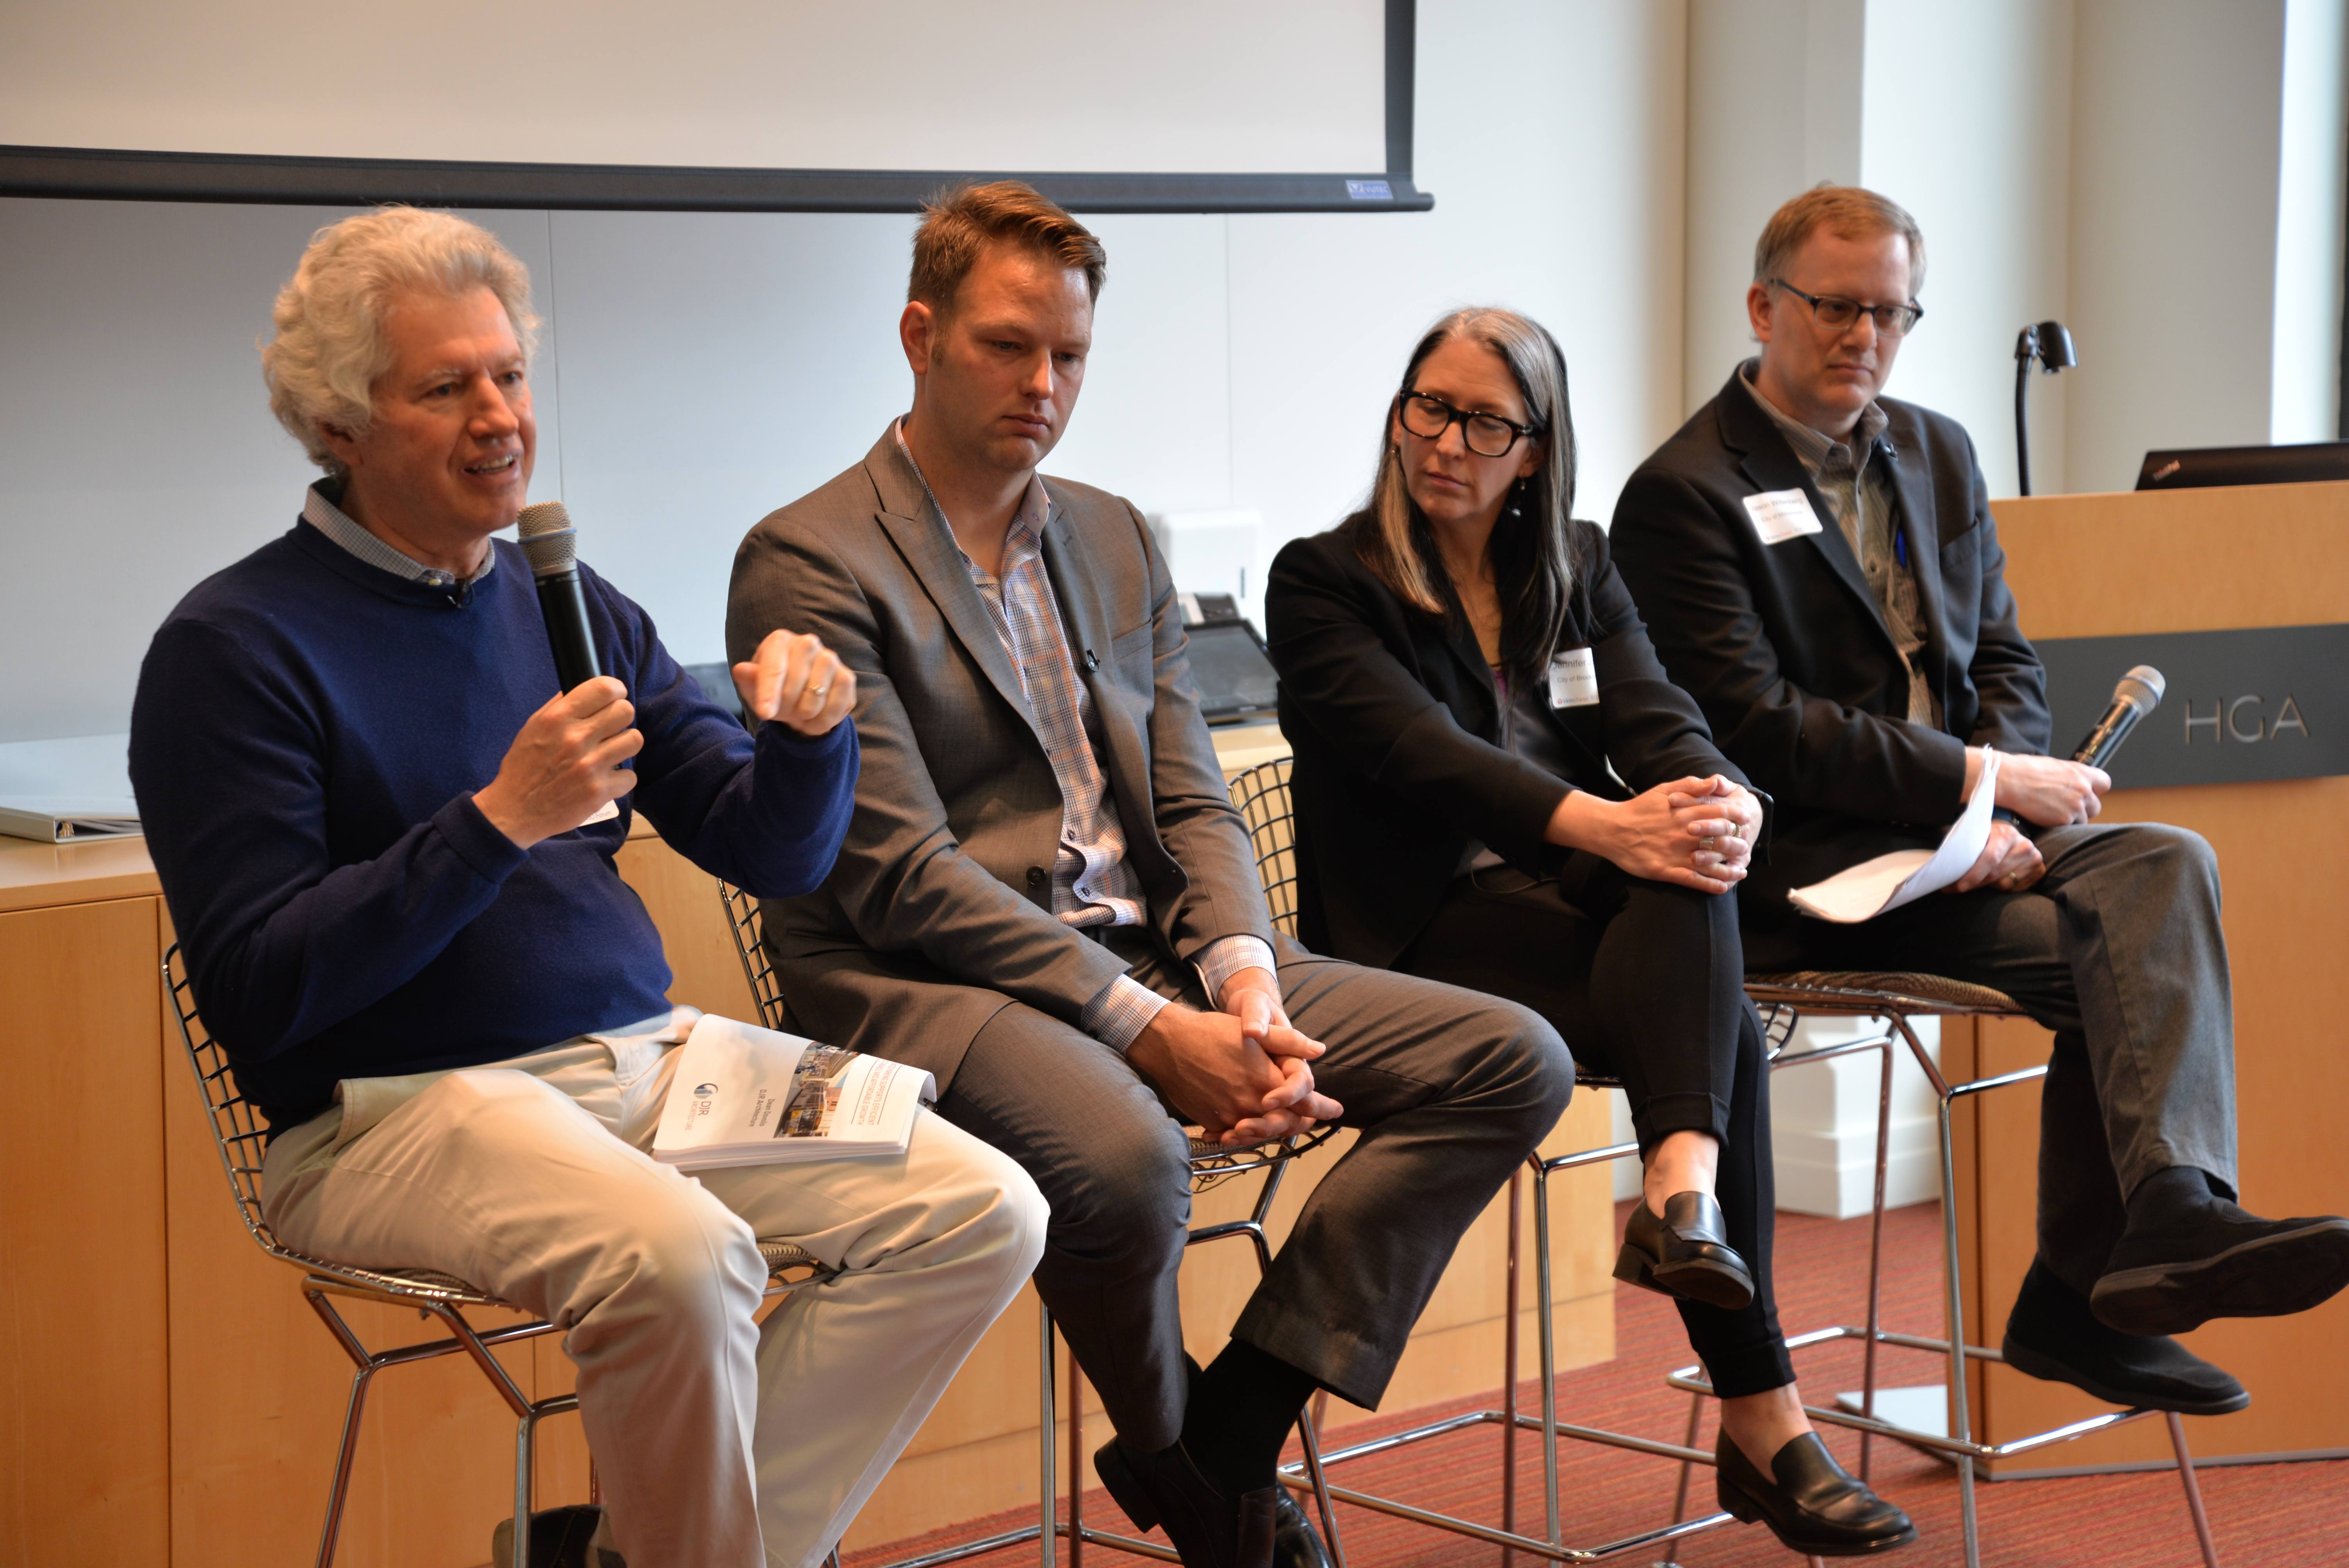 From left to right: Dean Dovolis, founder, CEO and principal at Minneapolis-based DJR Architecture, Inc.; Robb Lubenow, co-founder of Minneapolis-based Yellow Tree Development; Jennifer Jordan, Senior Project Manager for the City of Brooklyn; and Jason Wittenberg, the Manager of Land Use, Design and Preservation for the City of Minneapolis. 